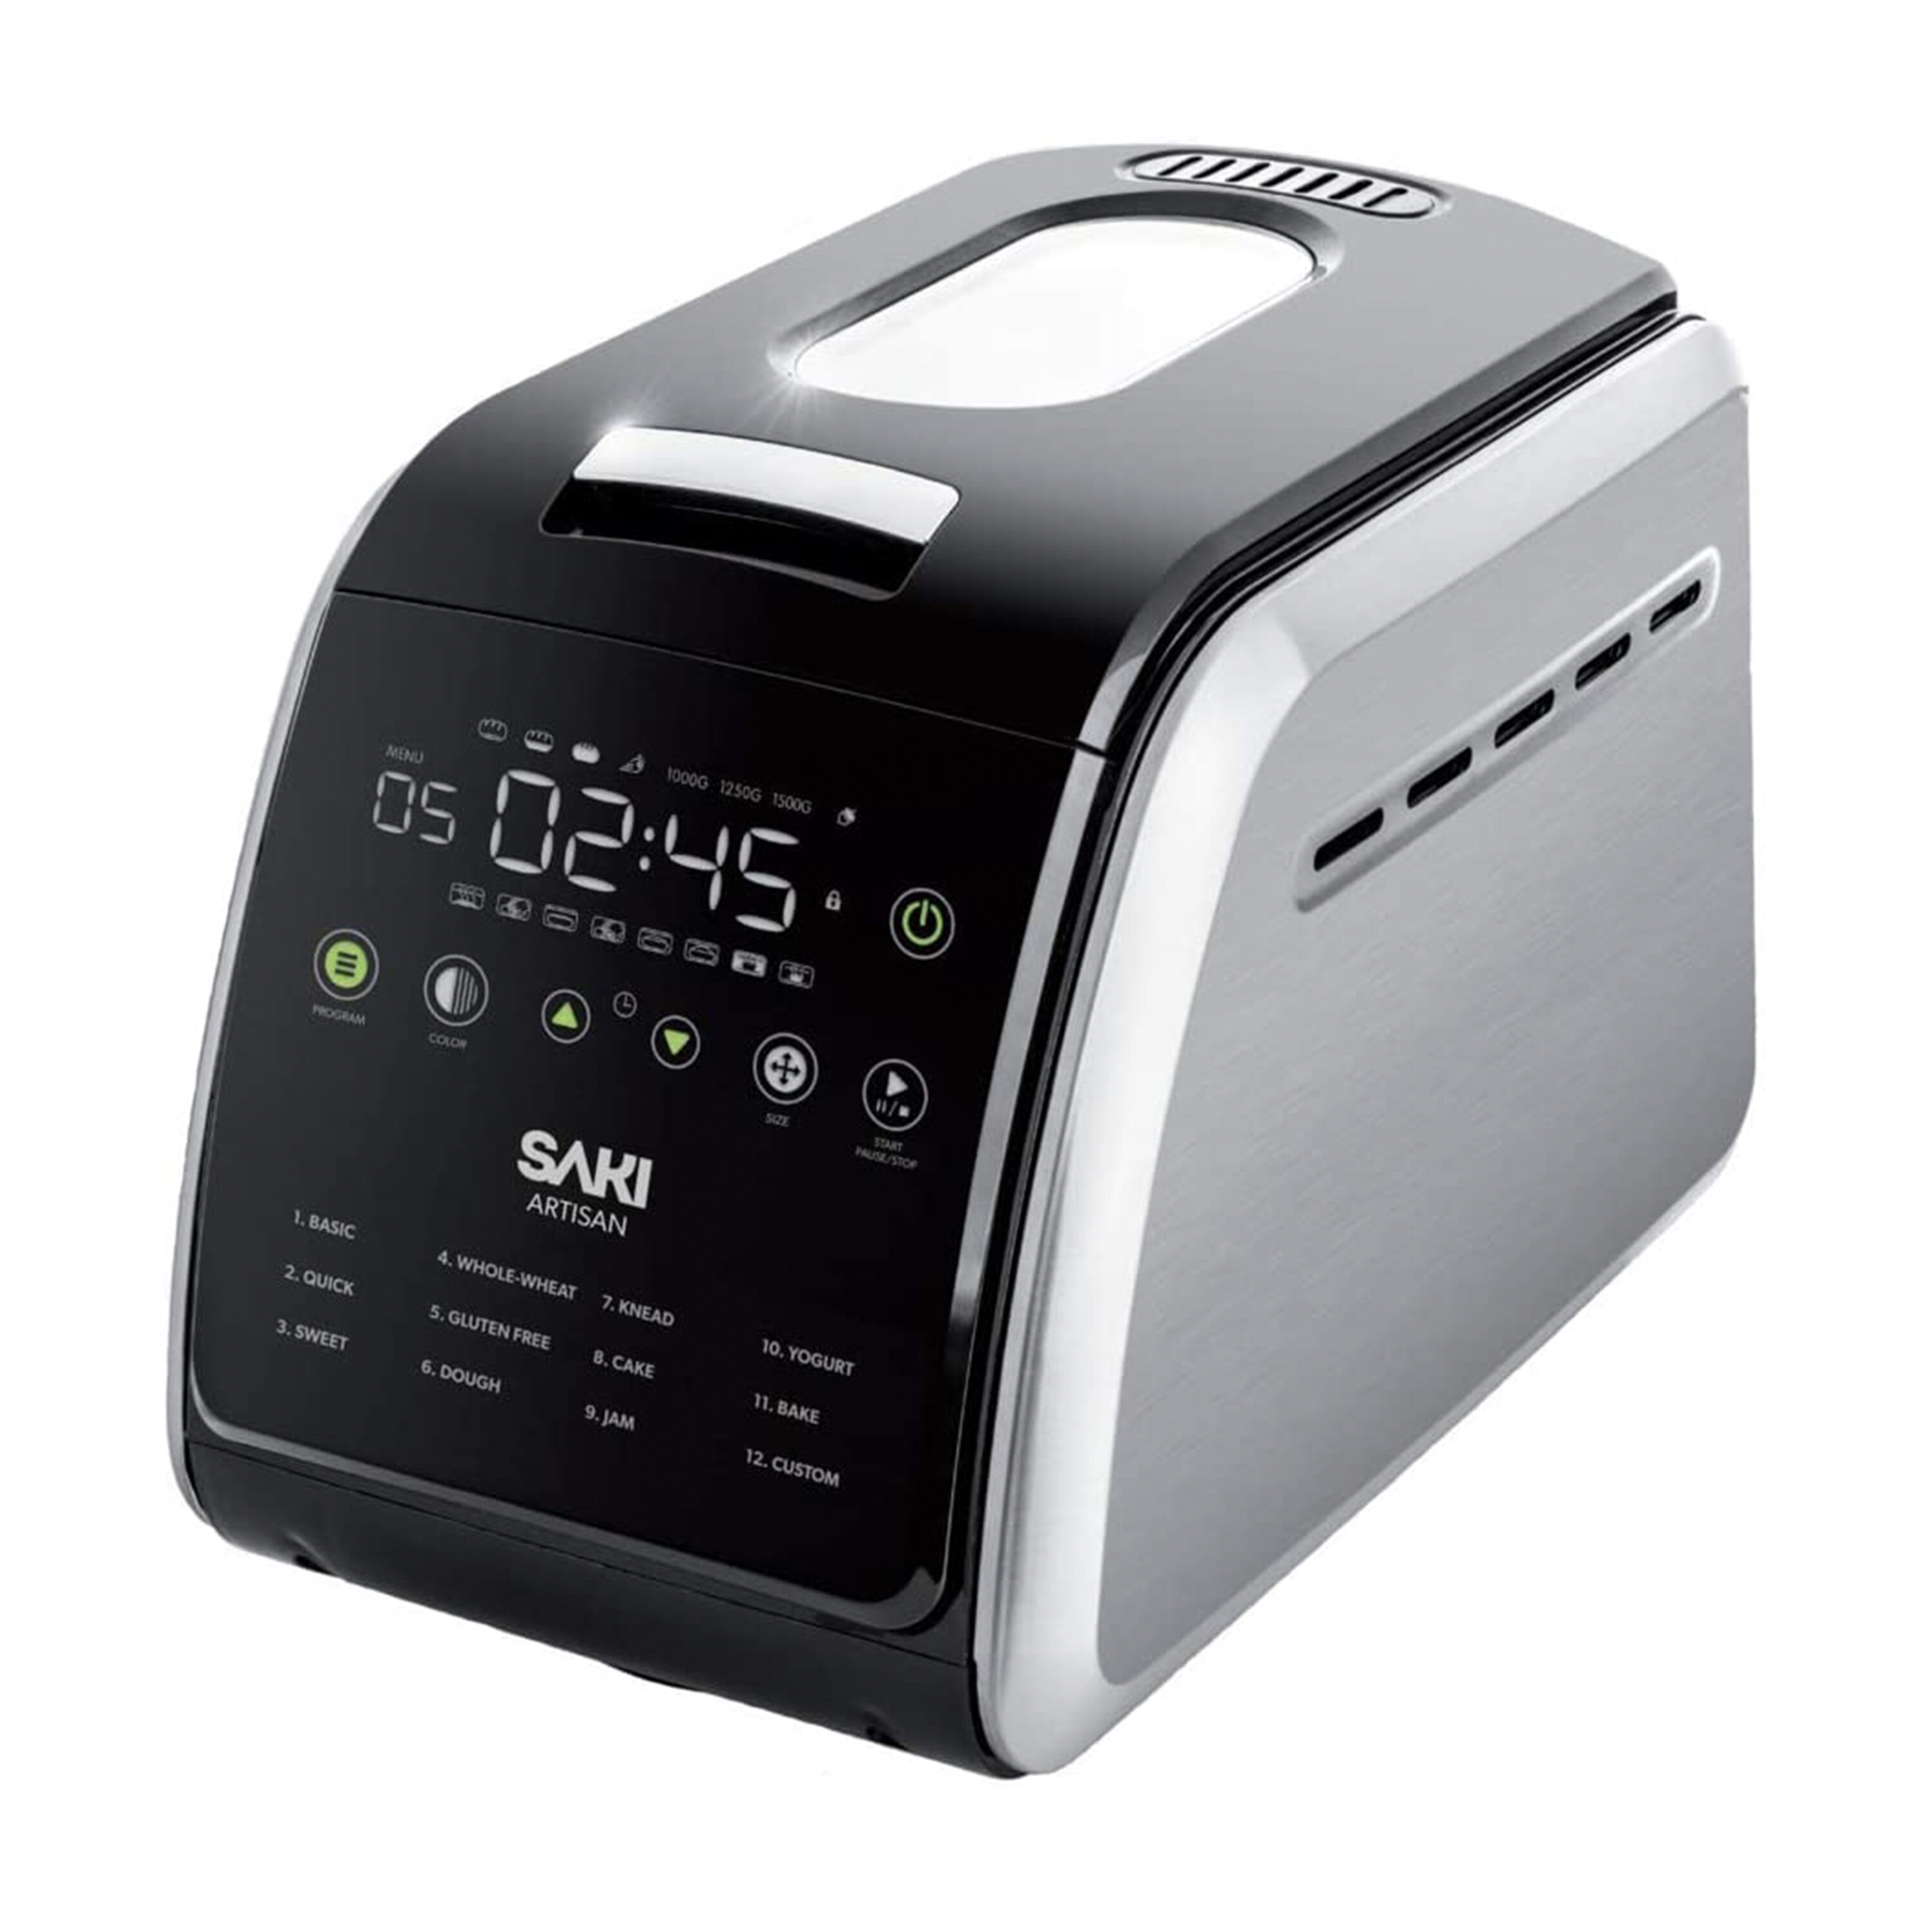 Cook's Essentials 850 1.5-lb Stainless Steel Bread Maker Black